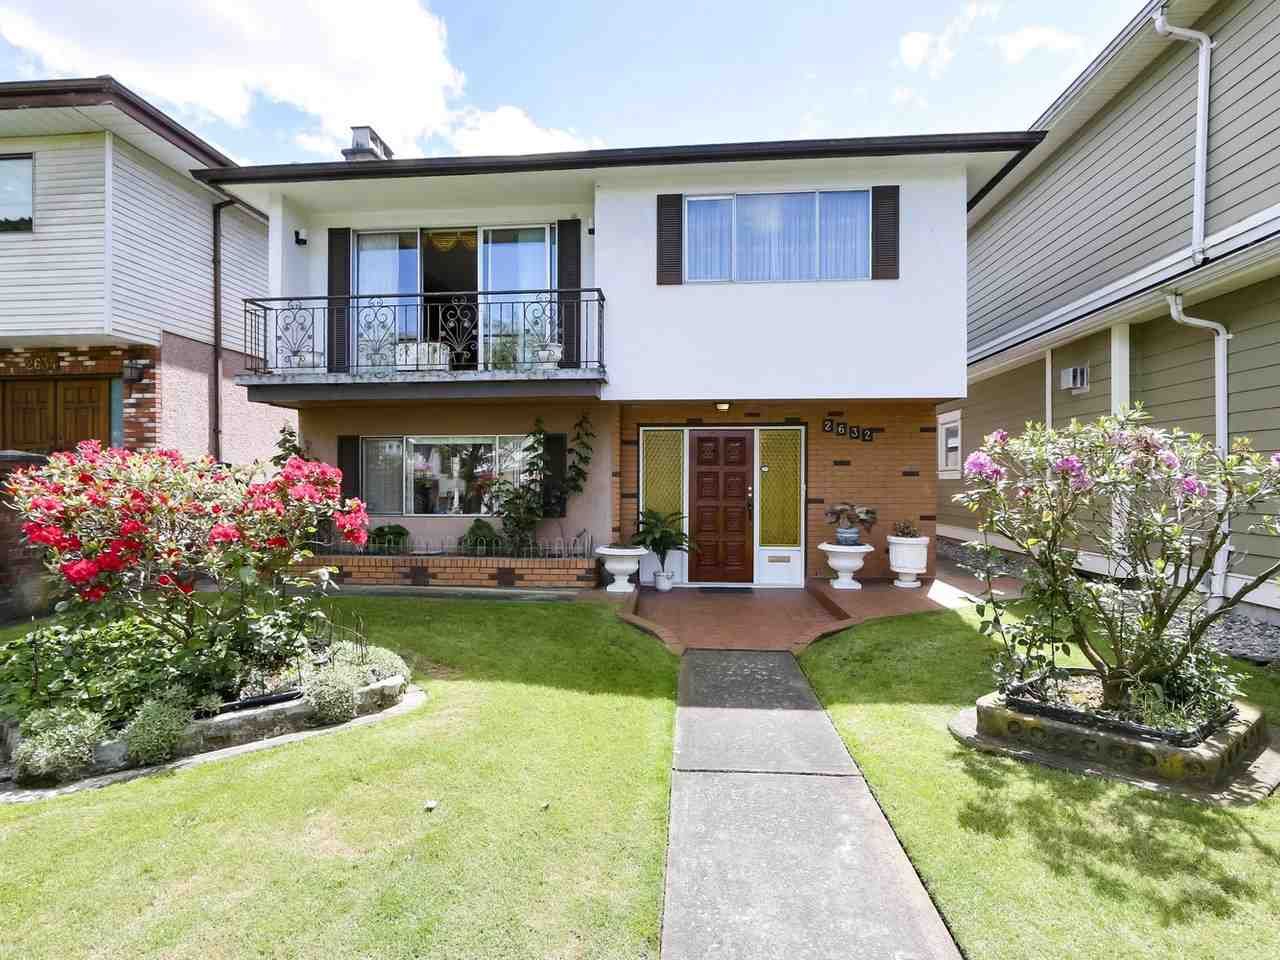 Main Photo: 2632 NAPIER Street in Vancouver: Renfrew VE House for sale (Vancouver East)  : MLS®# R2458851